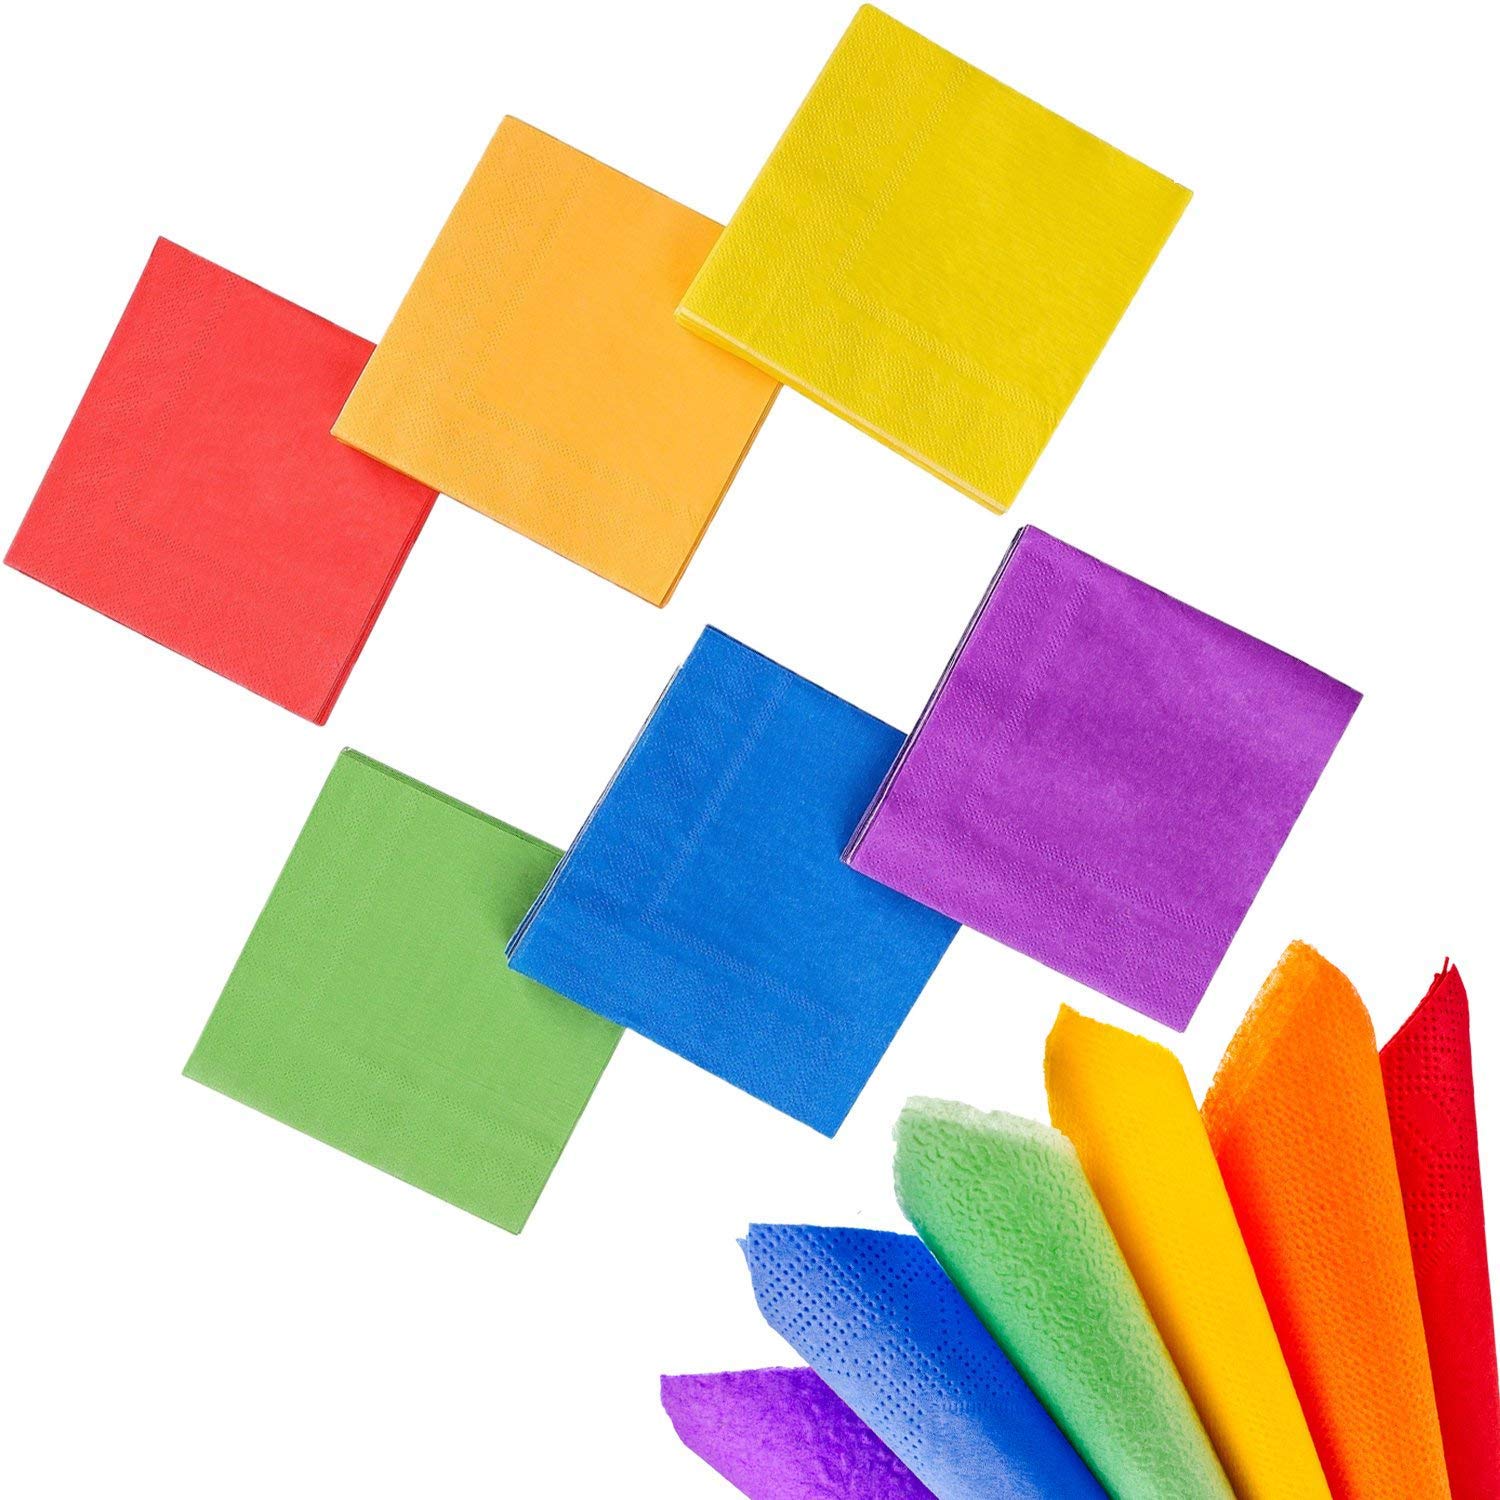 Assorted Rainbow Colors Bulk Tissue Paper, 120 sheets - Tissue